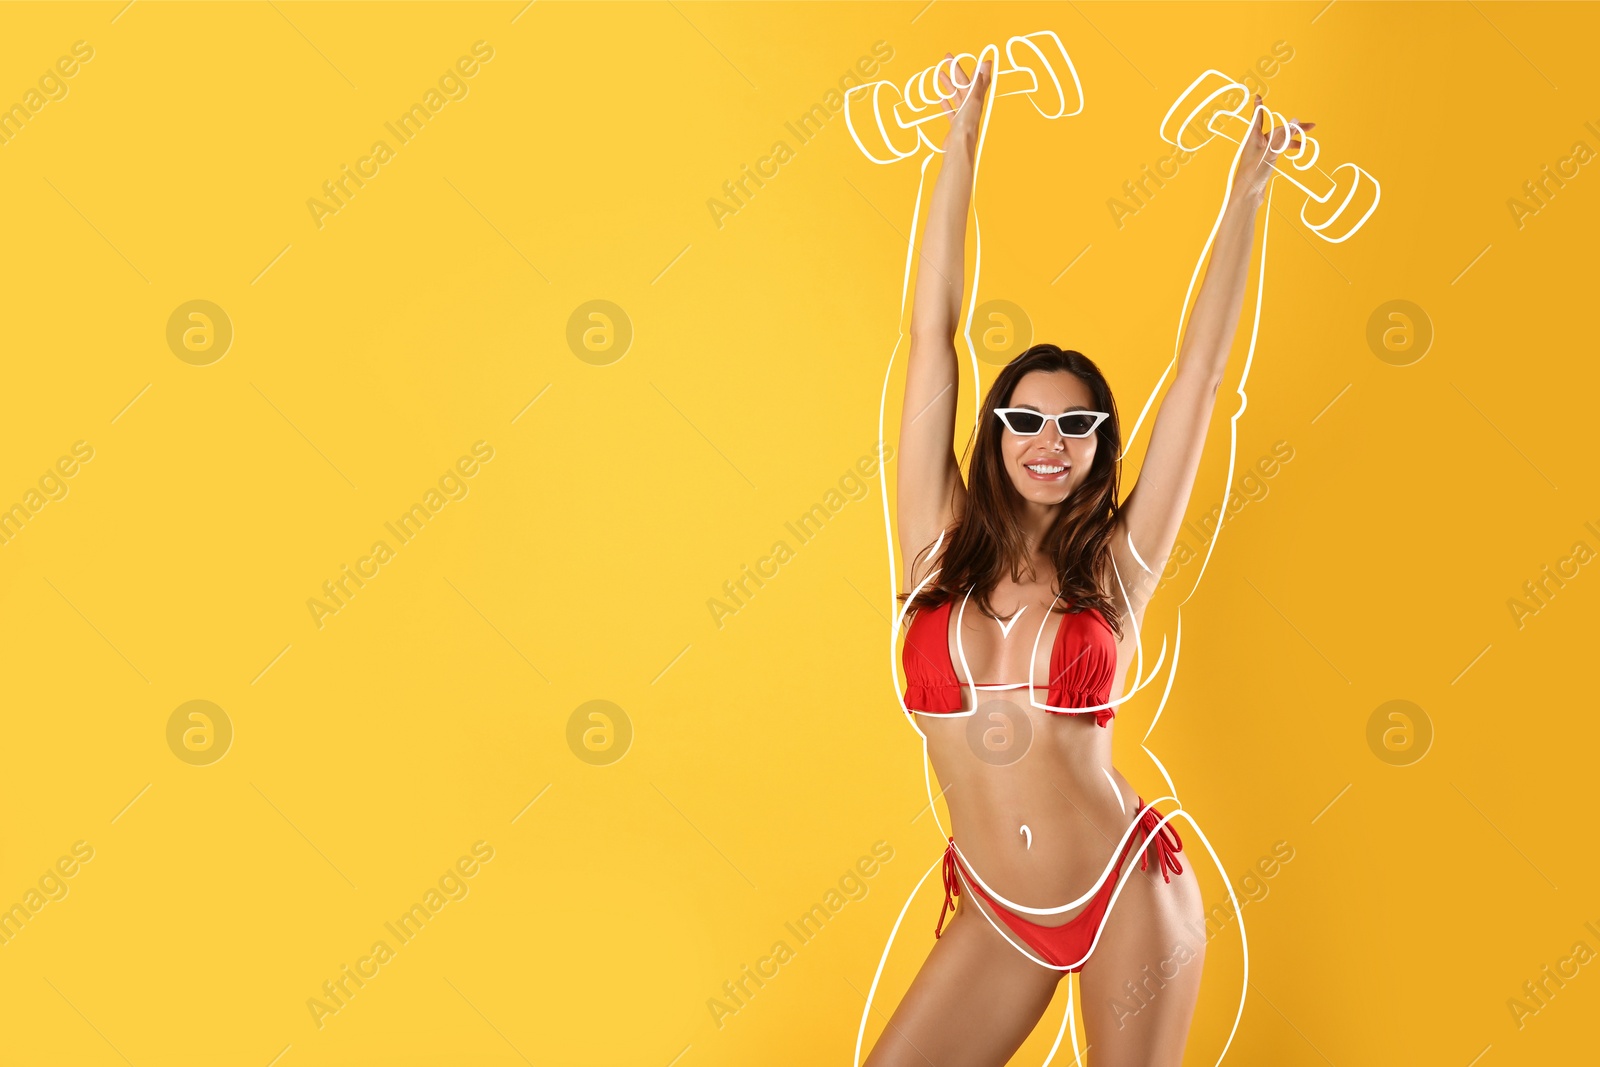 Image of Happy slim woman in swimsuit and sunglasses on orange background. Outline with dumbbells as her overweight figure before workout. Space for text